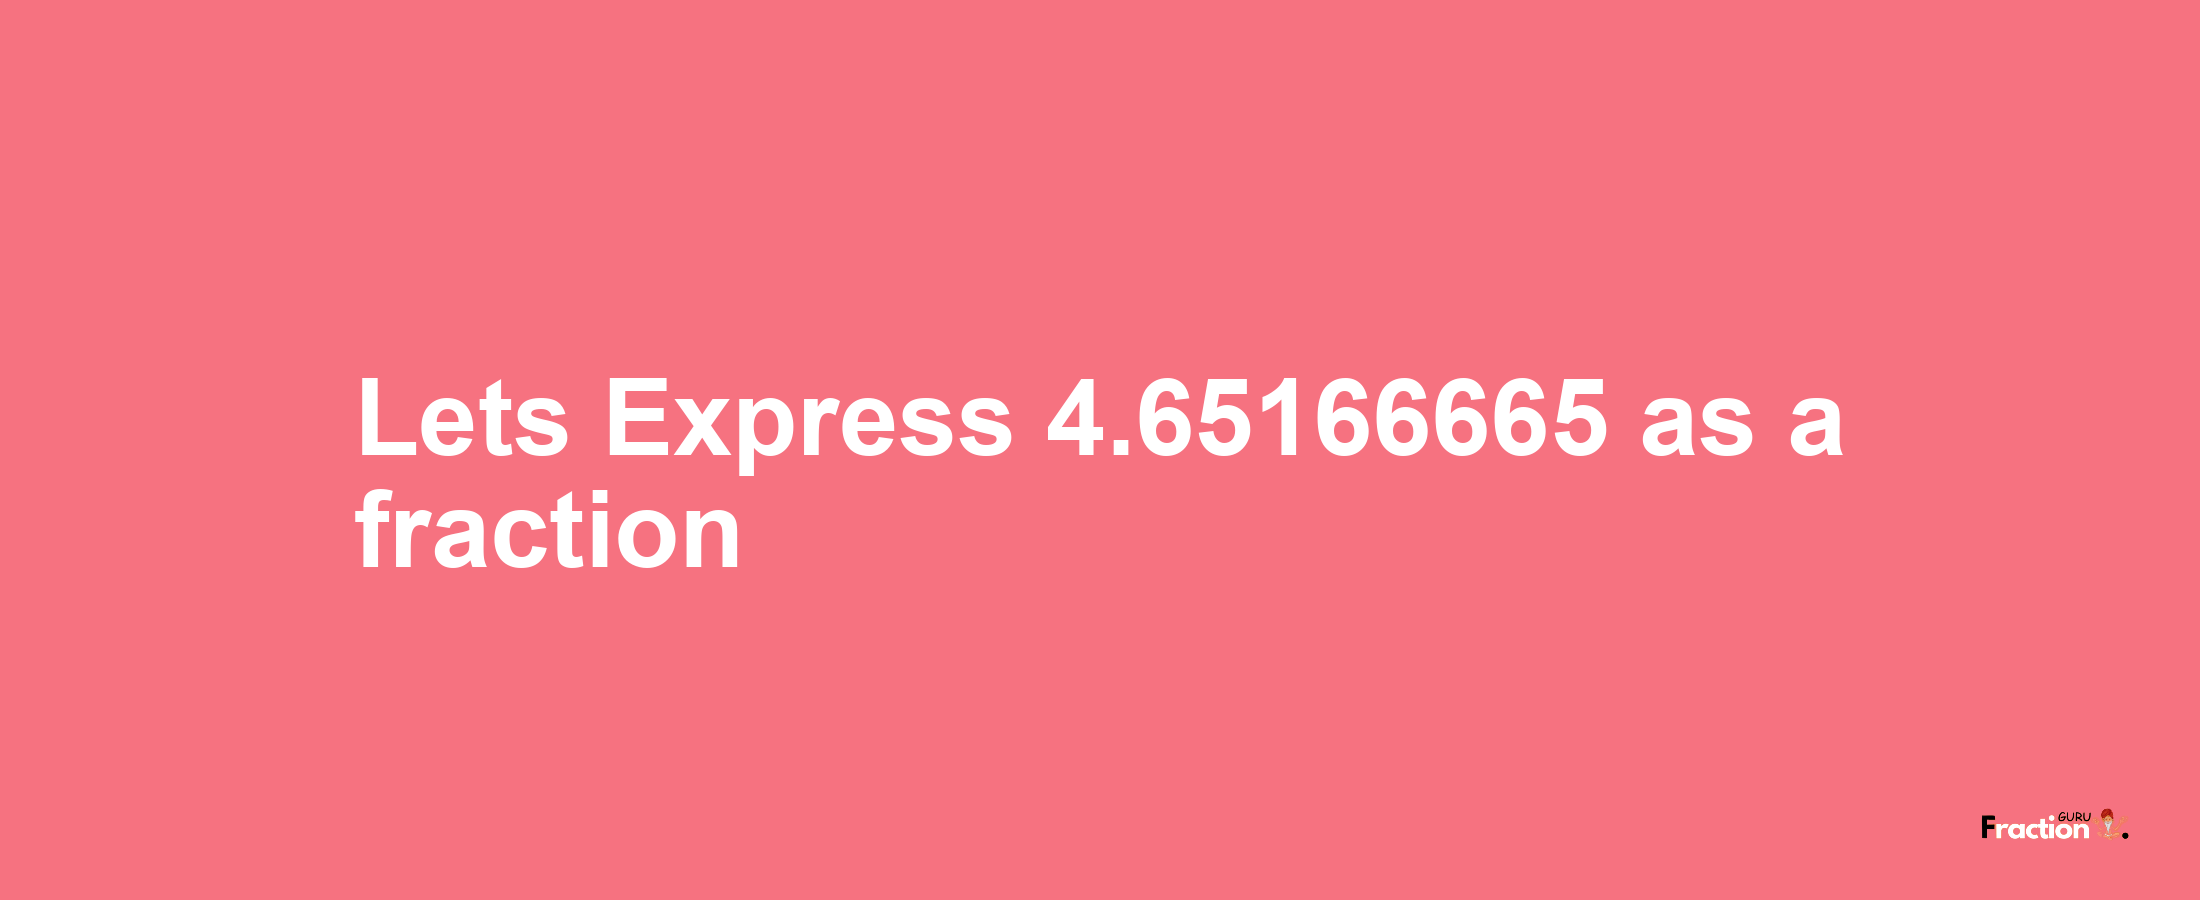 Lets Express 4.65166665 as afraction